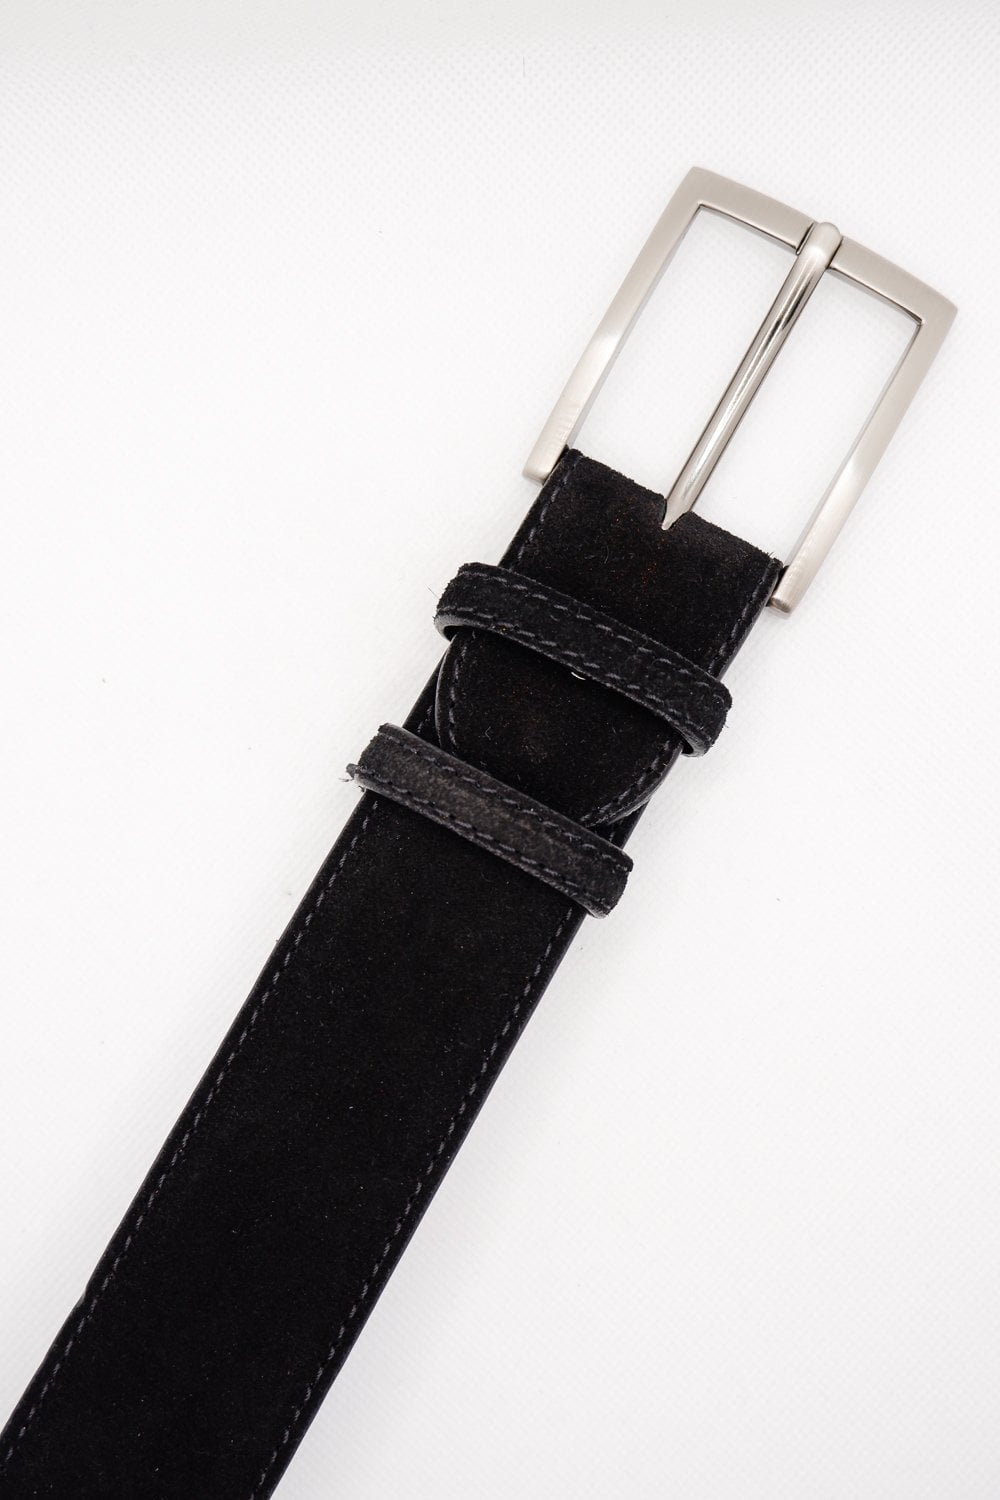 Buy the Elliot Rhodes Suede ER Belt Black at Intro. Spend £50 for free UK delivery. Official stockists. We ship worldwide.